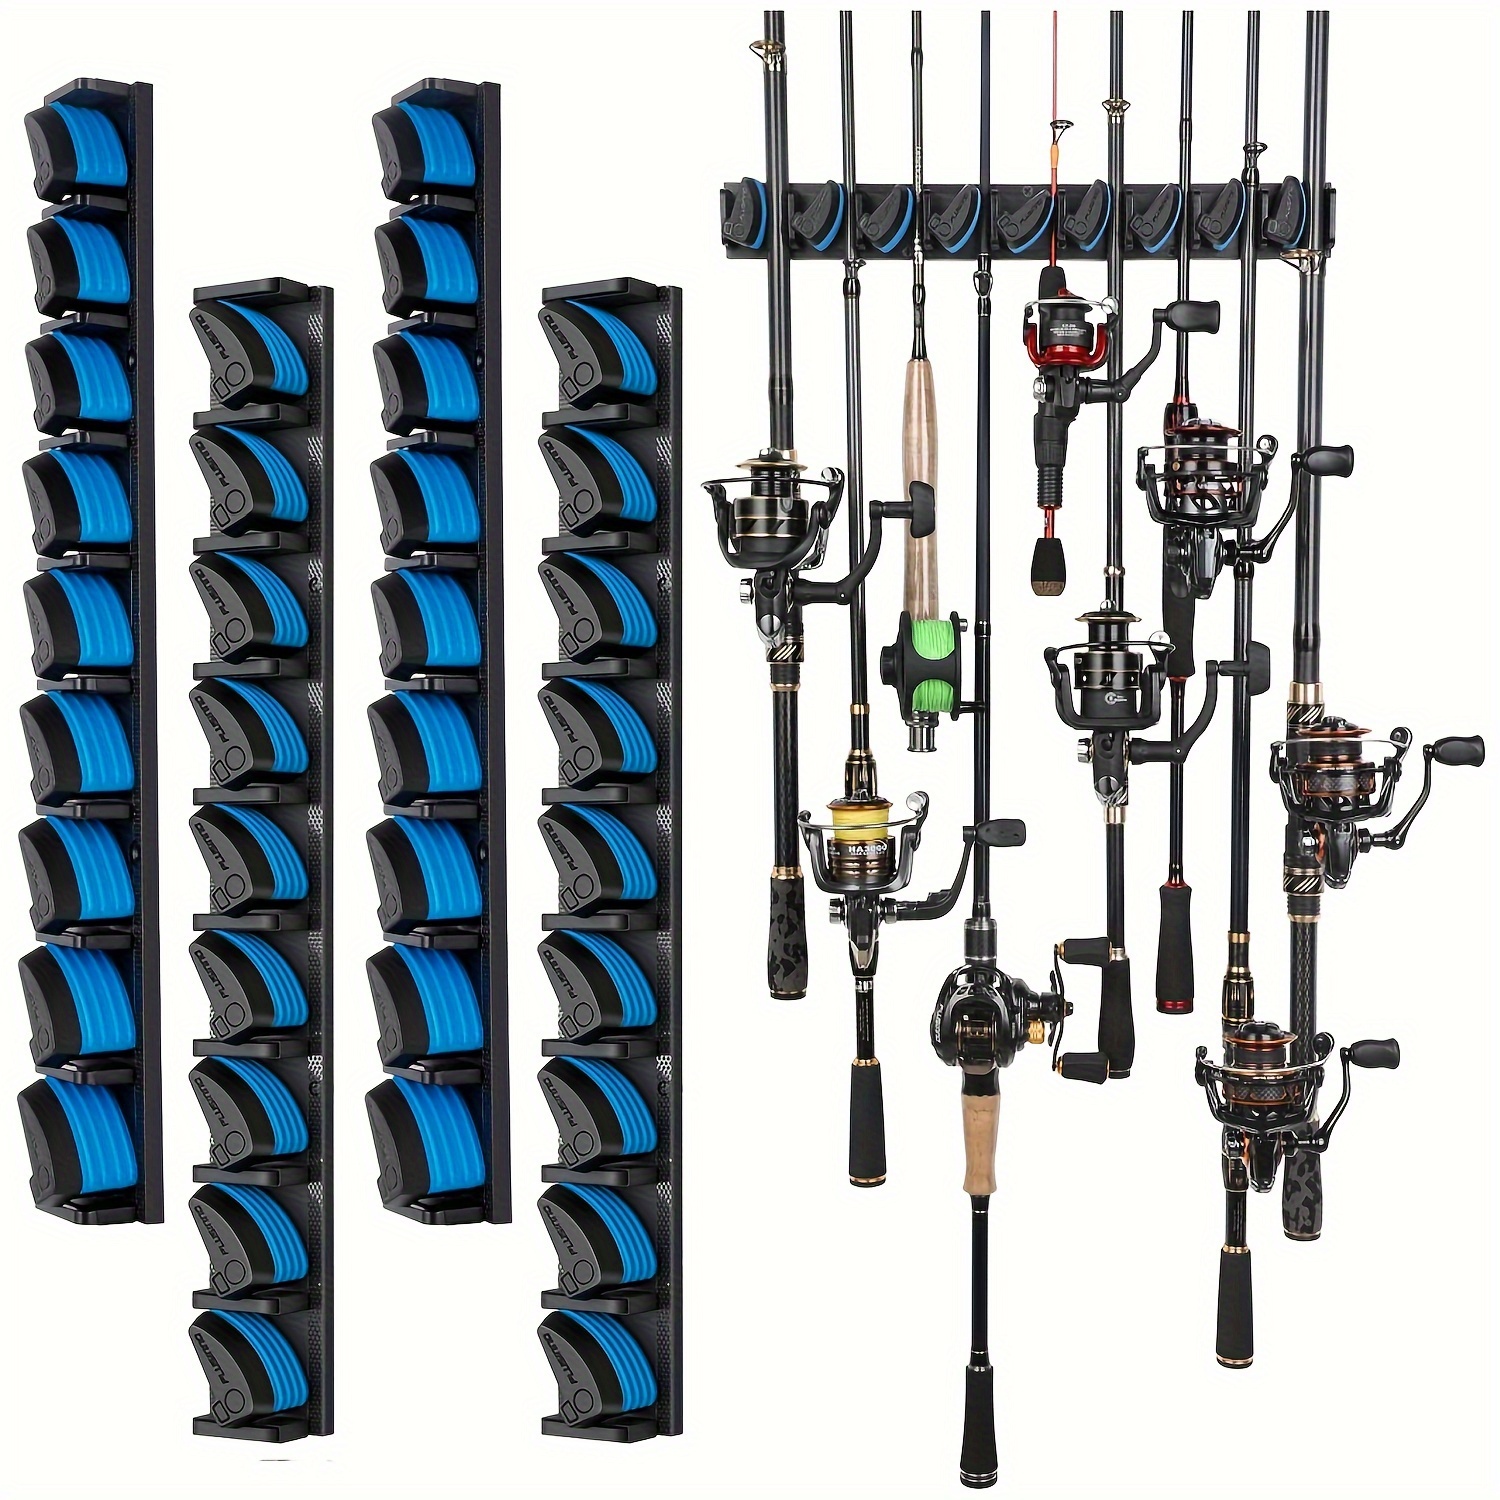 

Plusinno Wall Mounted Fishing Rod Rack, Vertical Fishing Rod Holder, Fishing Pole Holder Holds Up To 9 Rods Or Combos, For Garage, Fits Most Rods Of Diameter 3-19mm